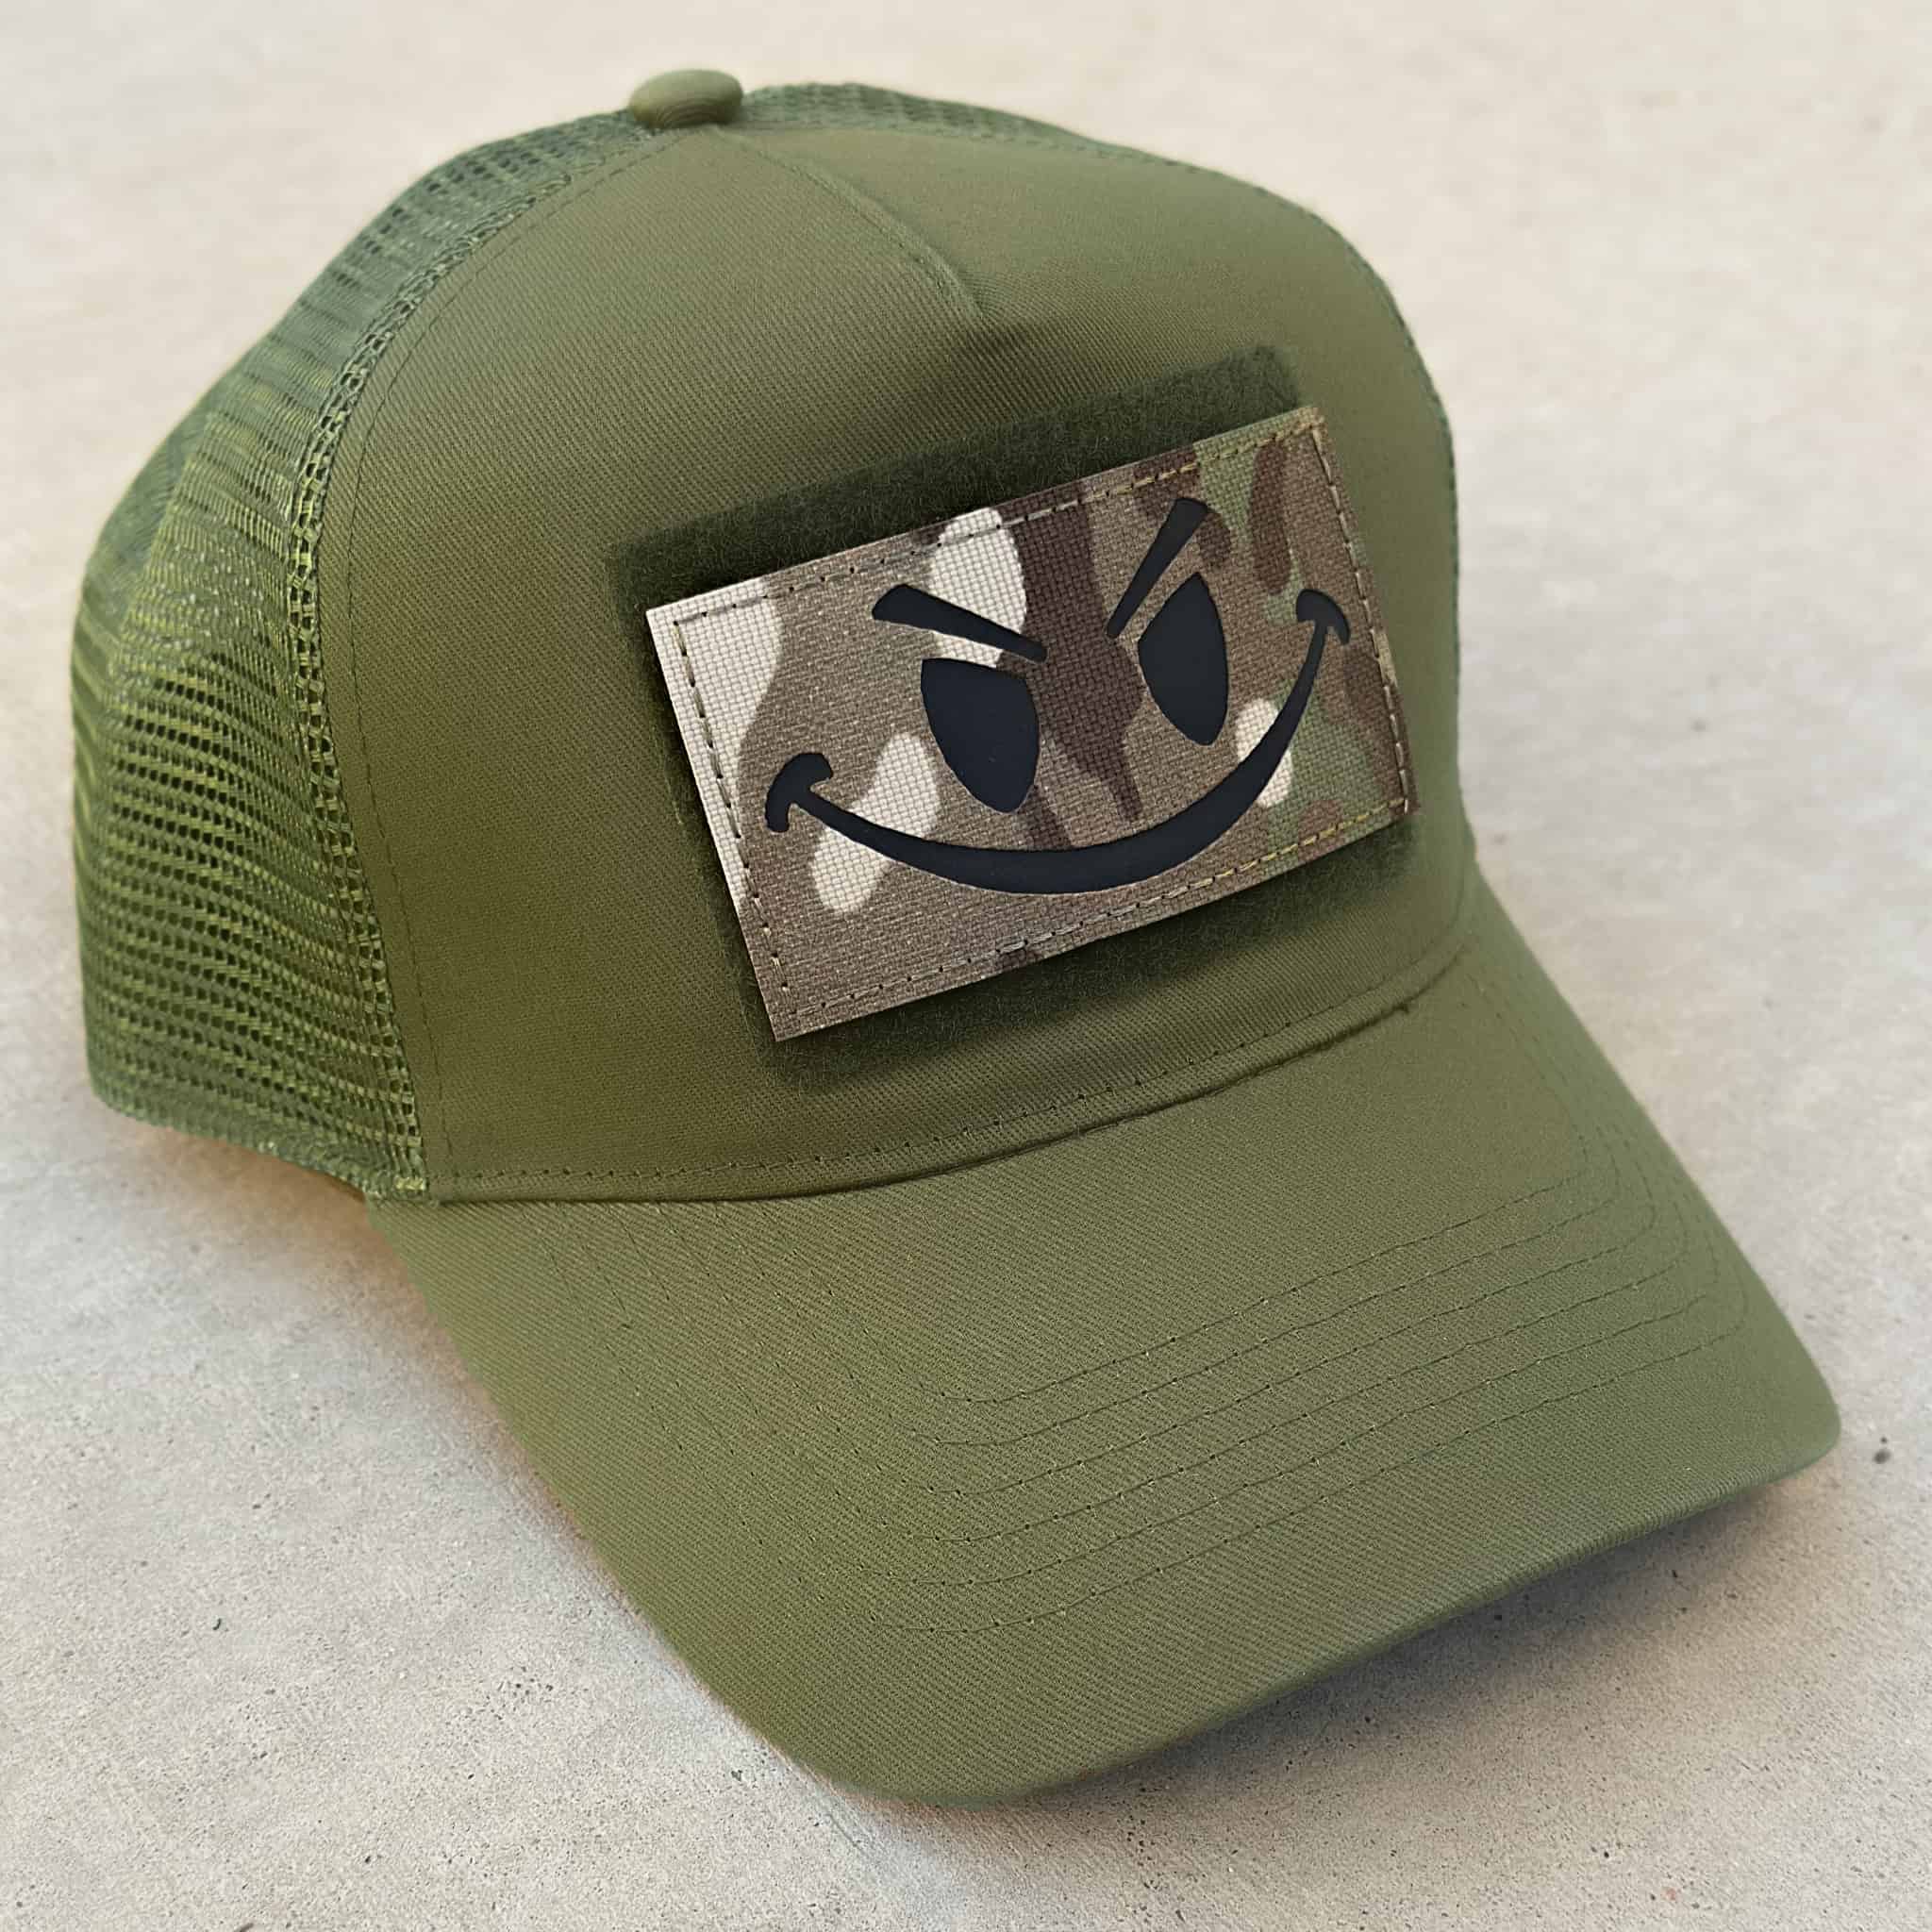 The Smiley cap in military green with camo military style smiley patch